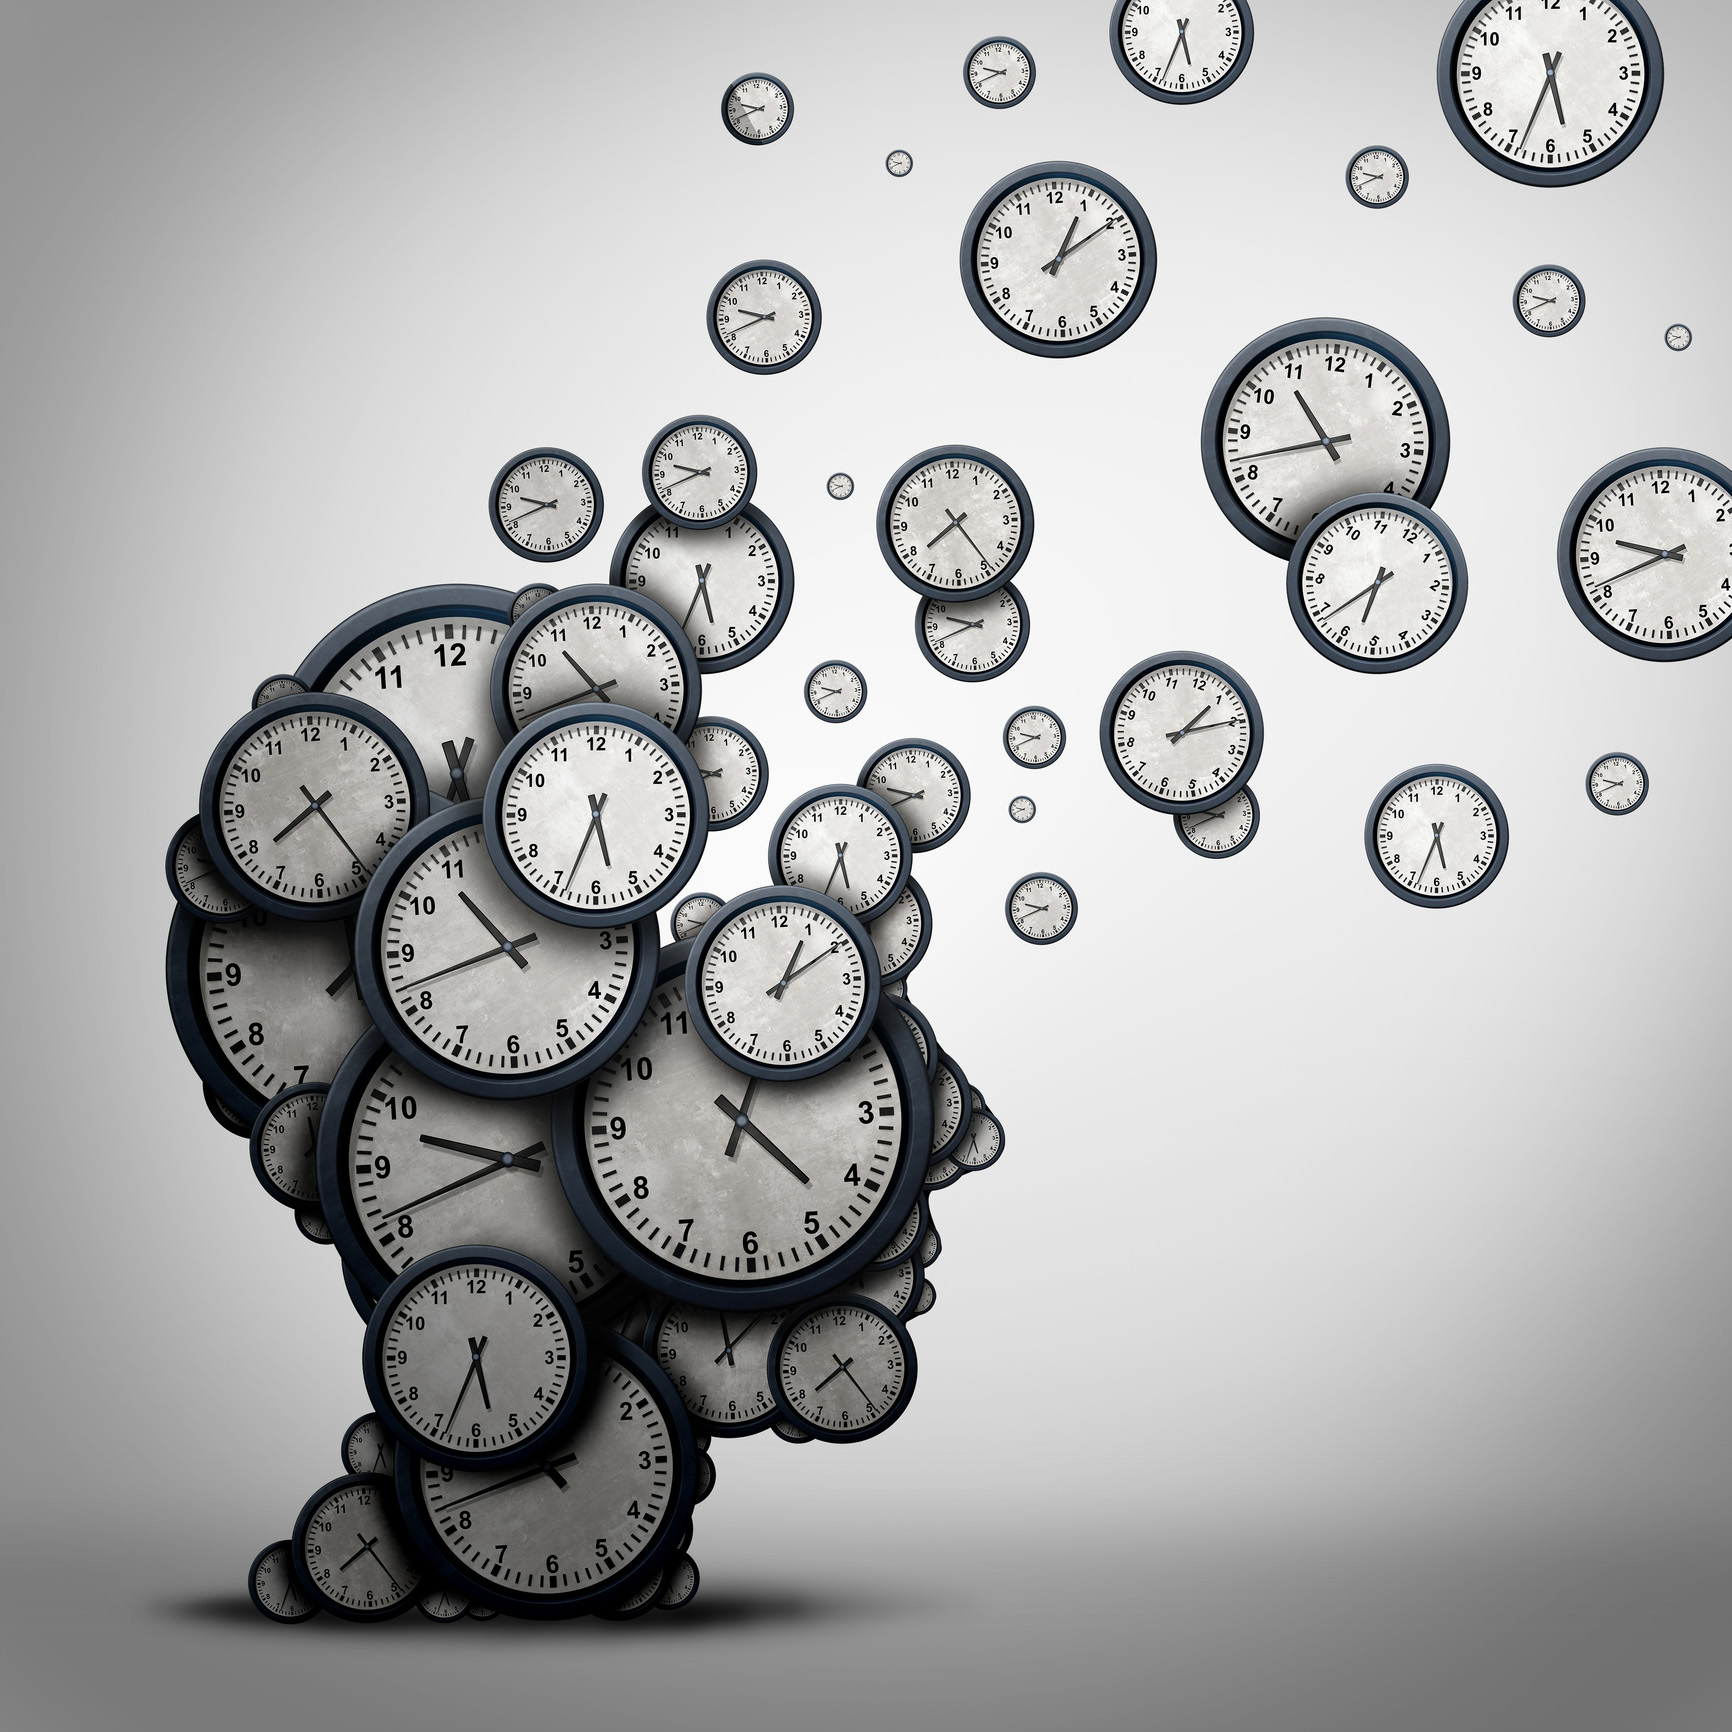 Illustration of time with a human head made of clocks.